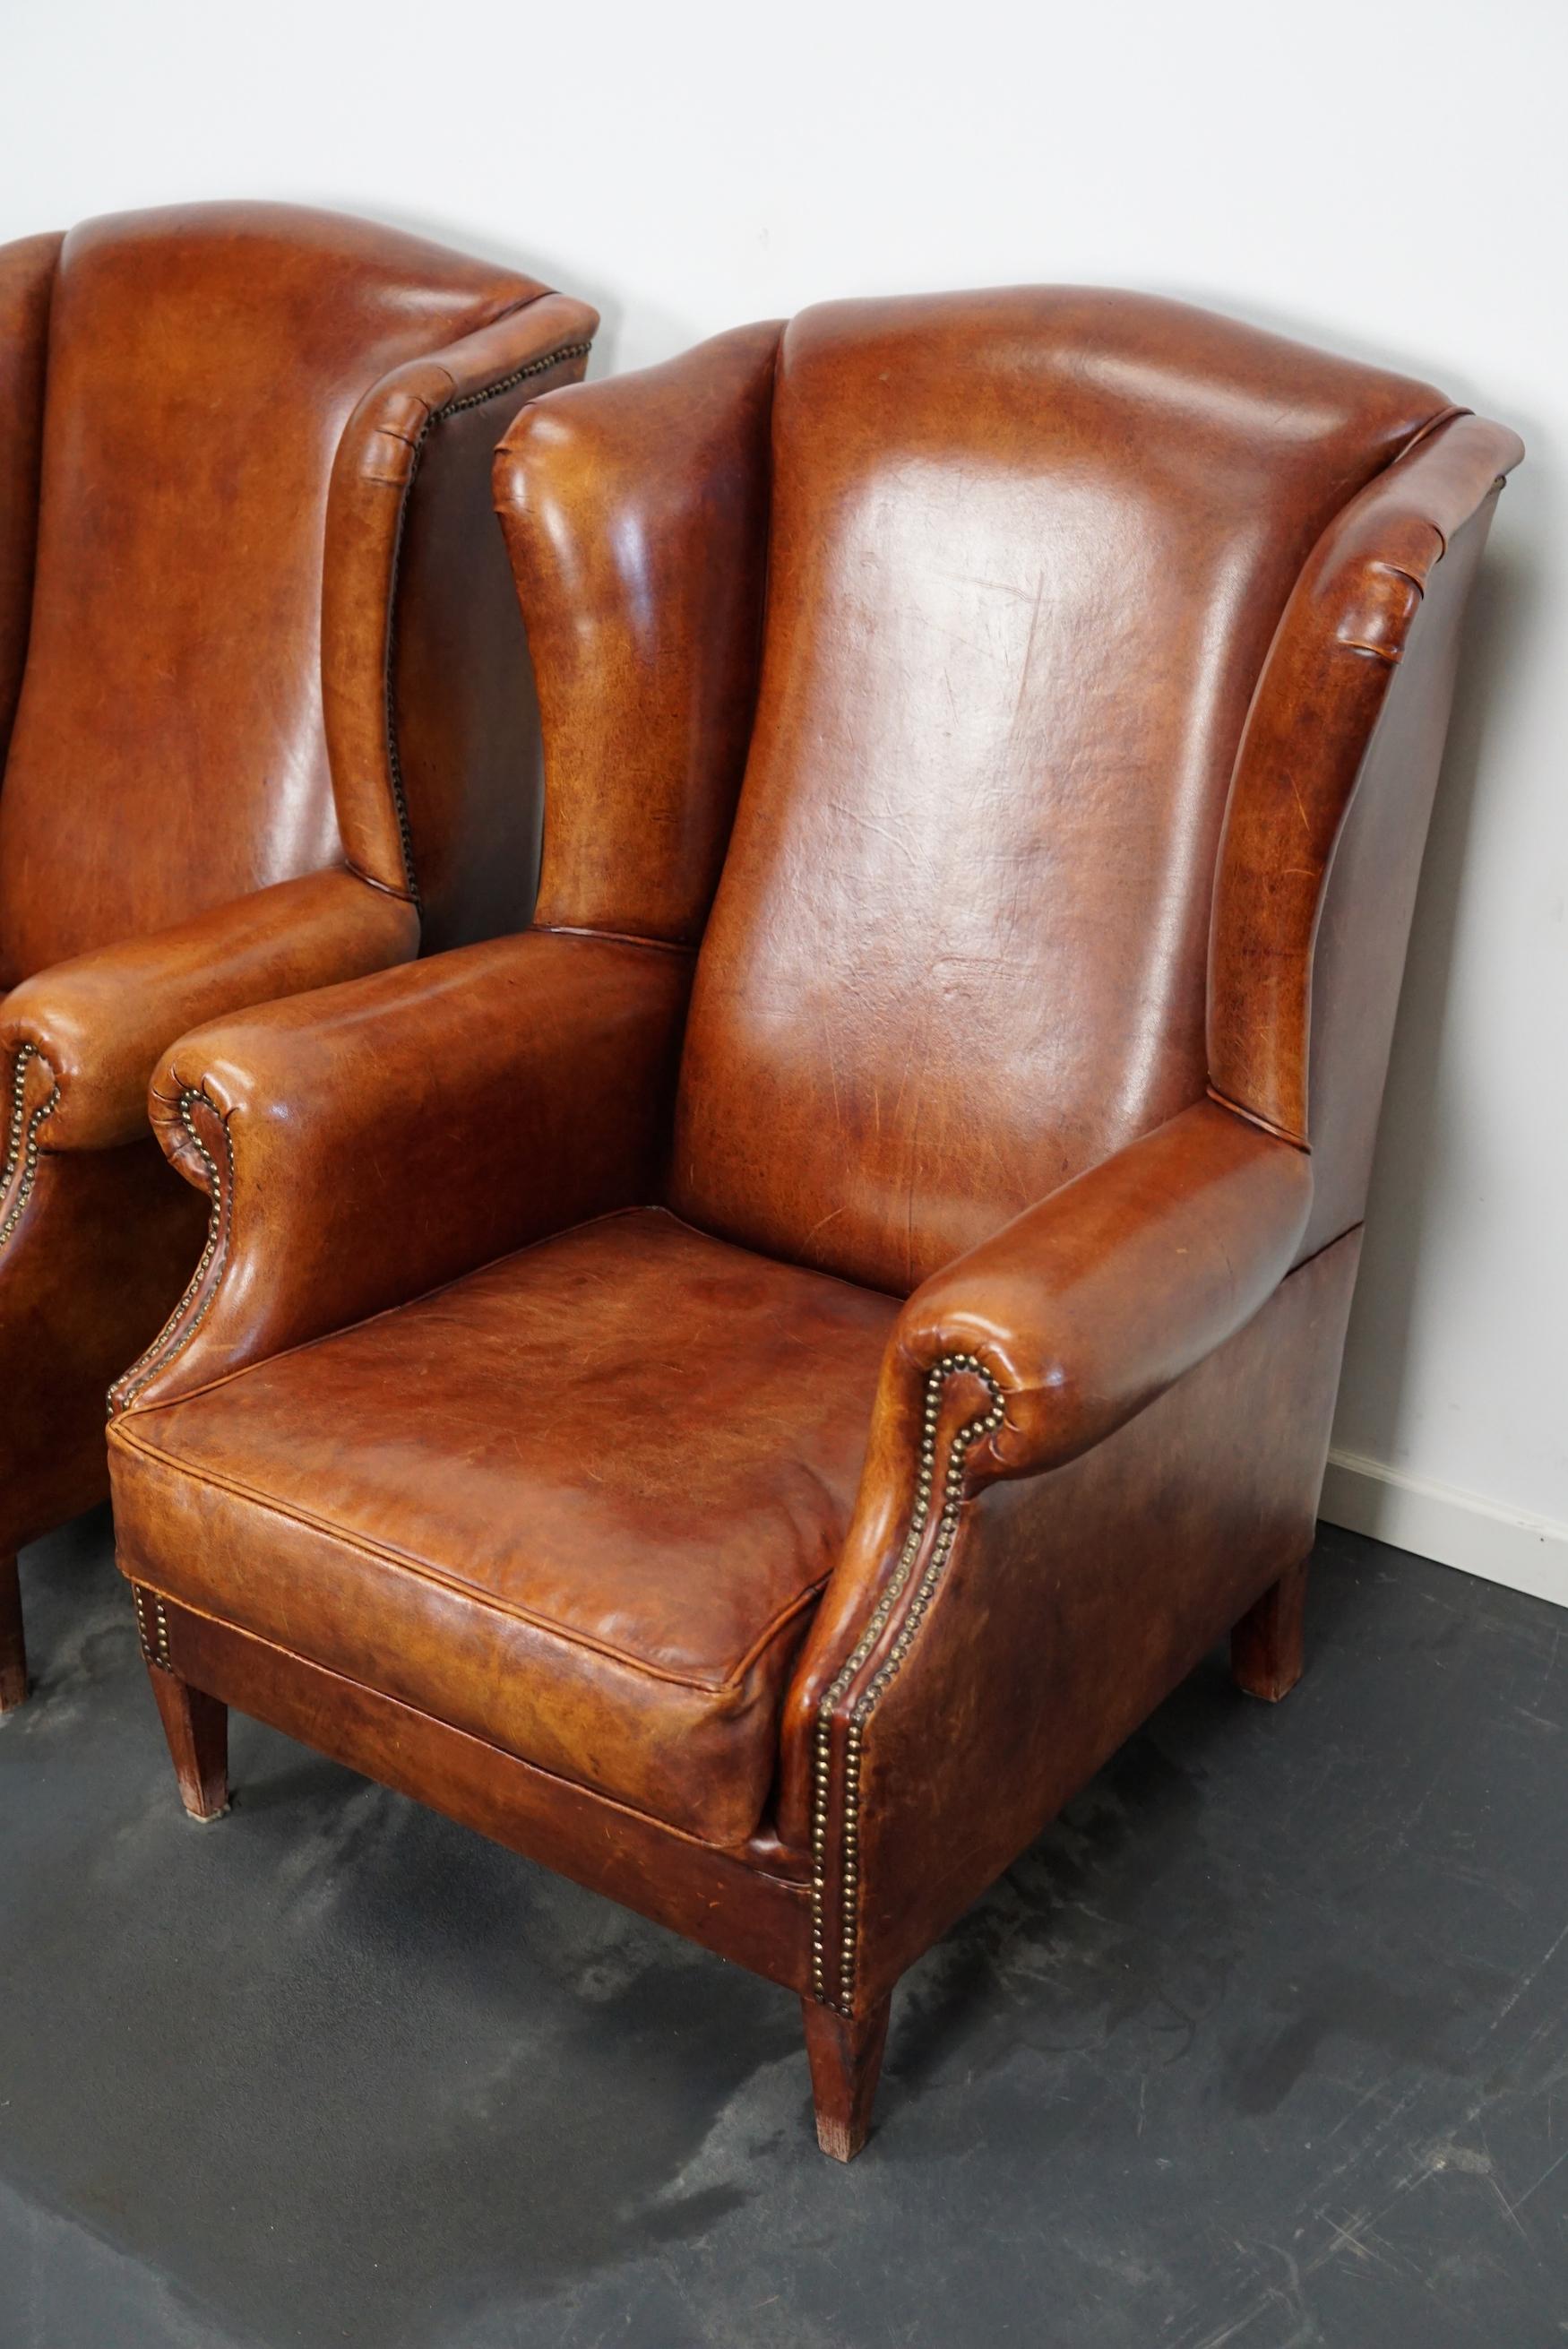 This pair of cognac-colored leather club chairs come from the Netherlands. They are upholstered with hand patinated leather and feature nails and wooden legs.